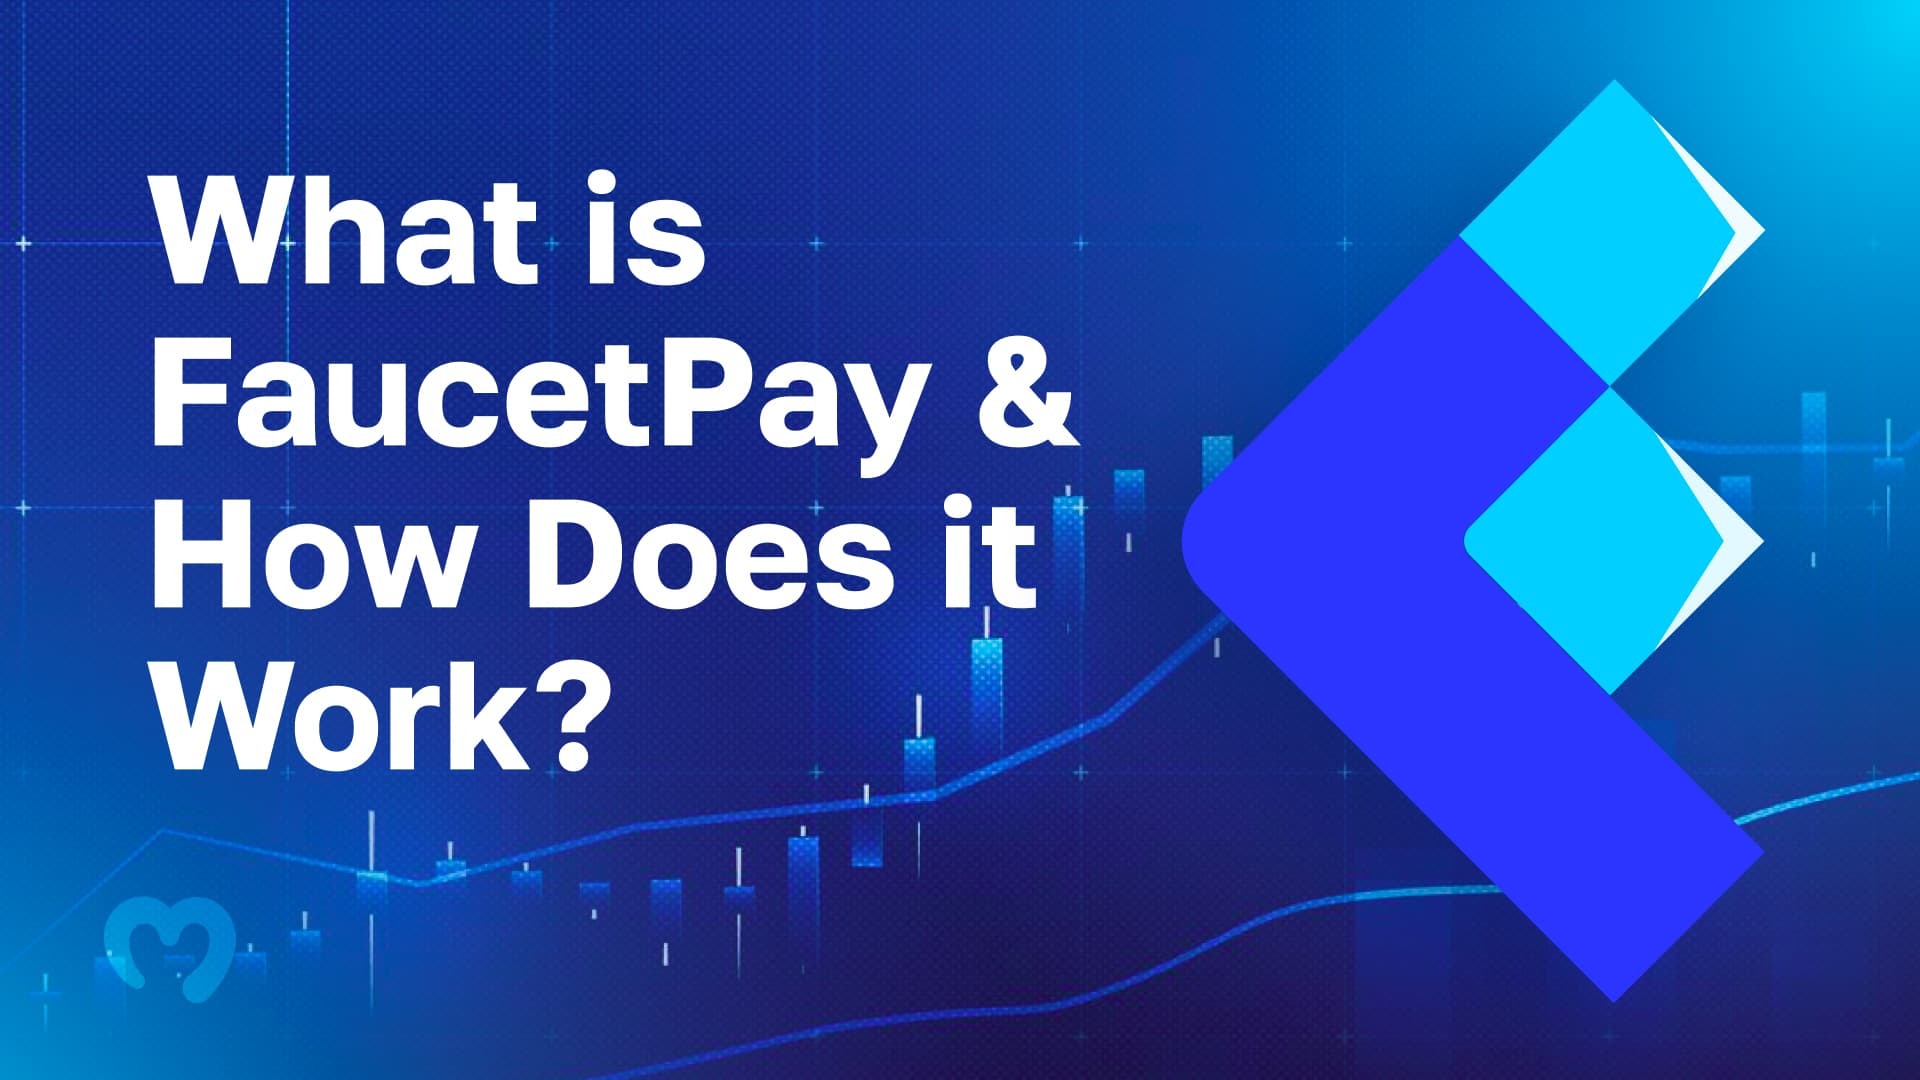 23_01_What-is-FaucetPay-and-How-Does-it-Work-